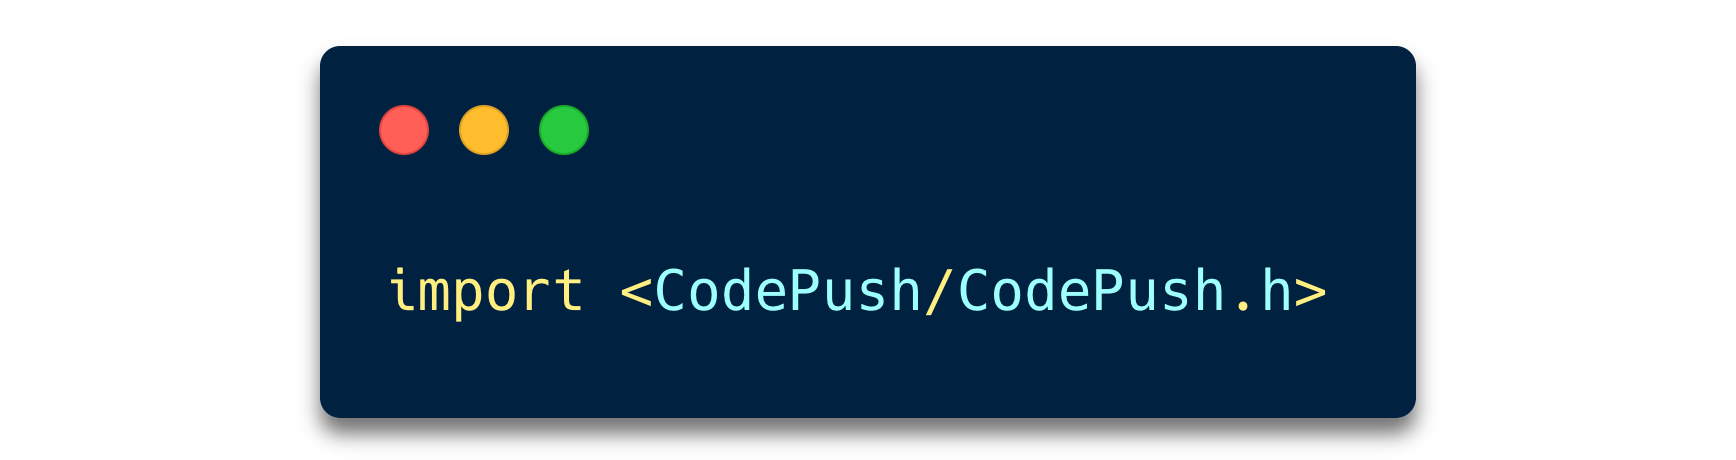 Updating your React Native app Live with CodePush  -  Step 5